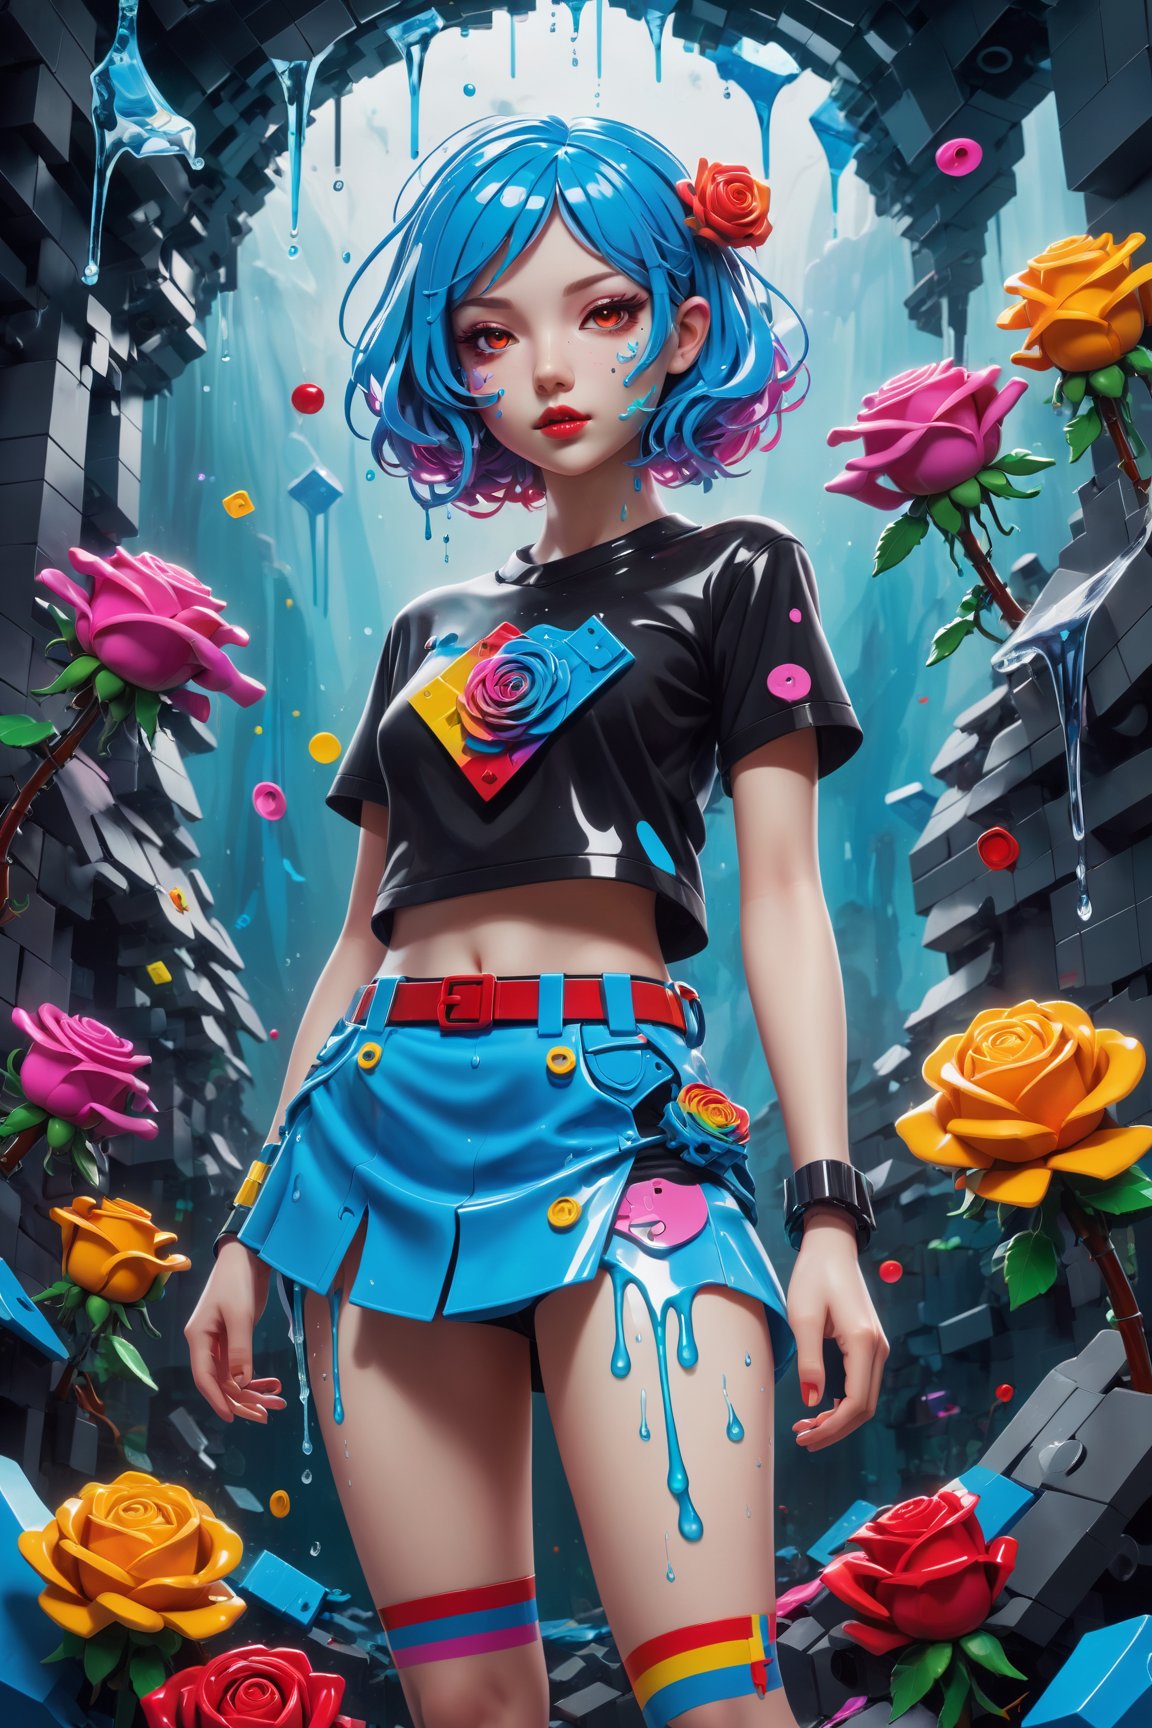 Abstract Pop Surrealism: A fusion of abstract, pop, and surreal styles brings forth a woman in a miniskirt, draped in a playful cosplay uniform, showcasing cute panties in a vibrant, dreamlike setting. ,sticker,dripping paint,roses_are_rosie,neon photography style,tshirt design,ice and water,tranzp,lego